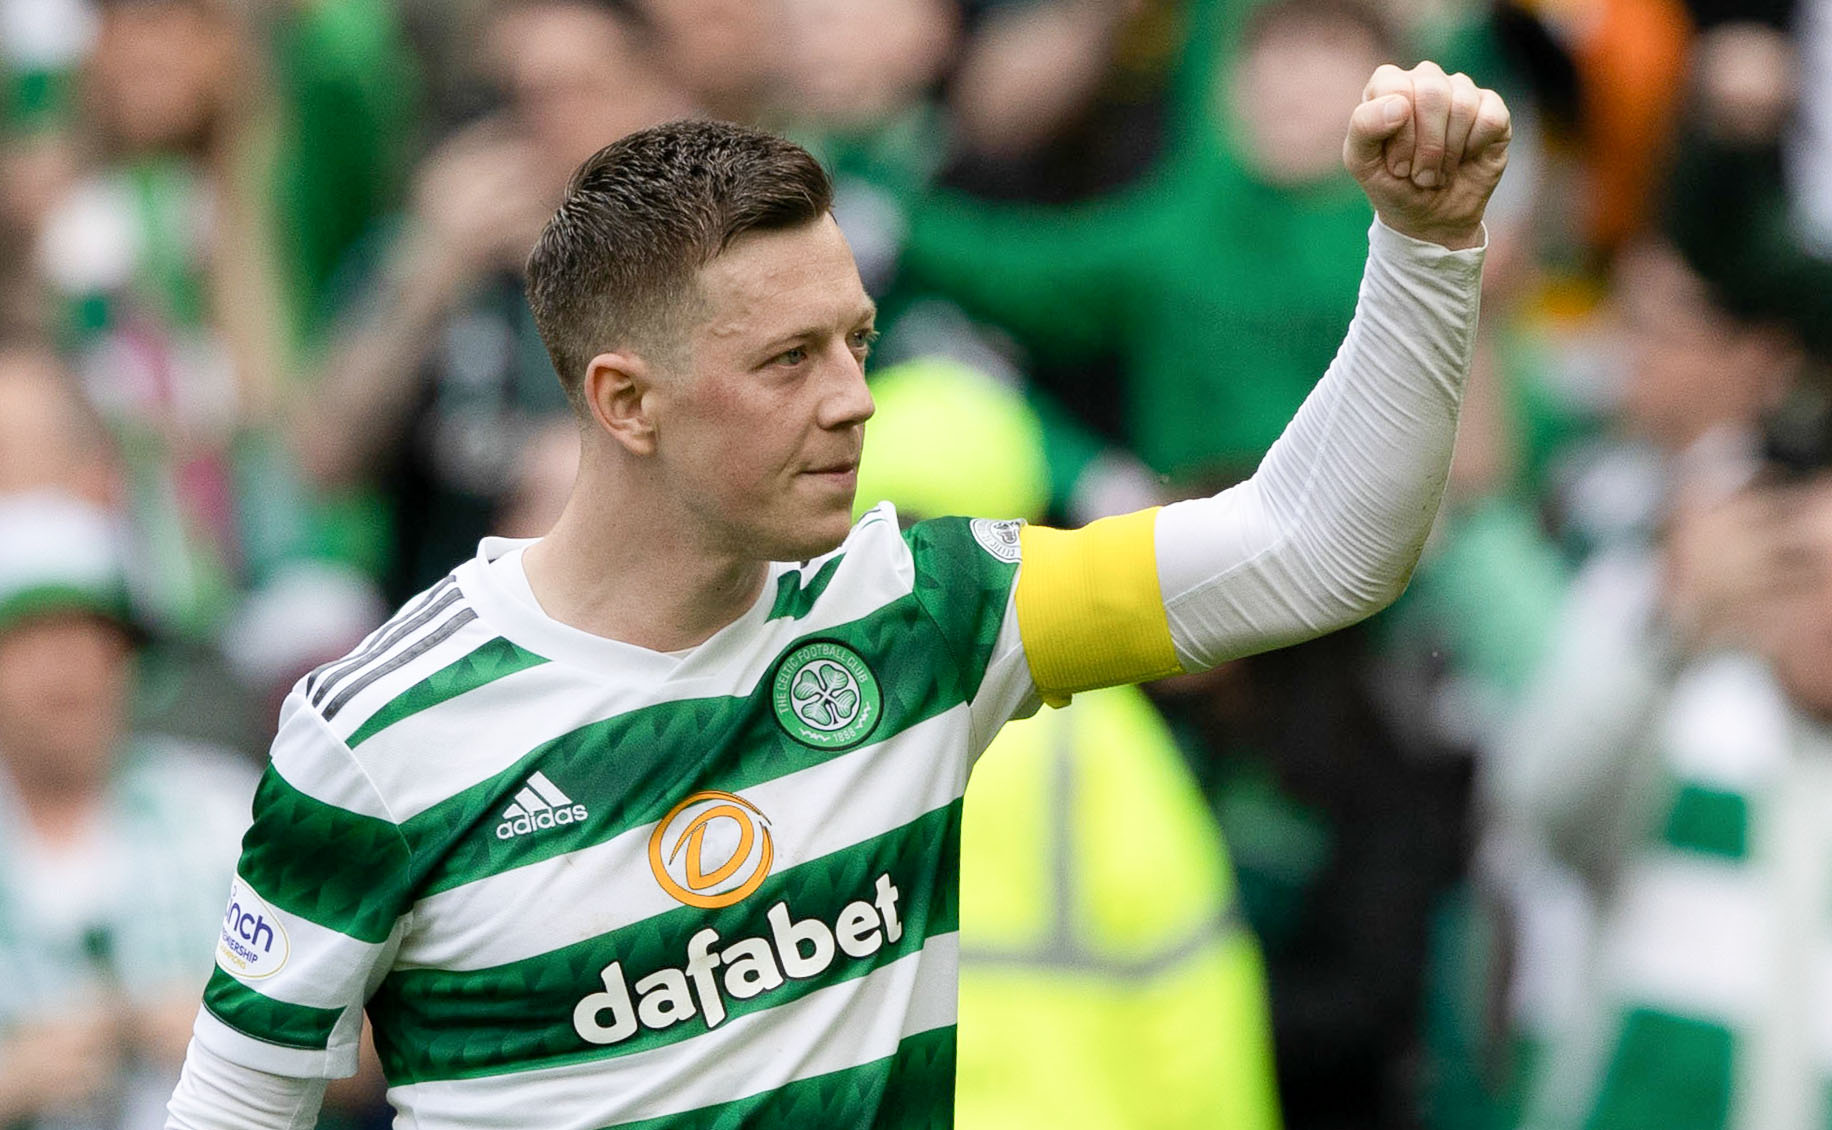 Alison McConnell: Champions elect Celtic ‘not winning the game’ is skewed logic